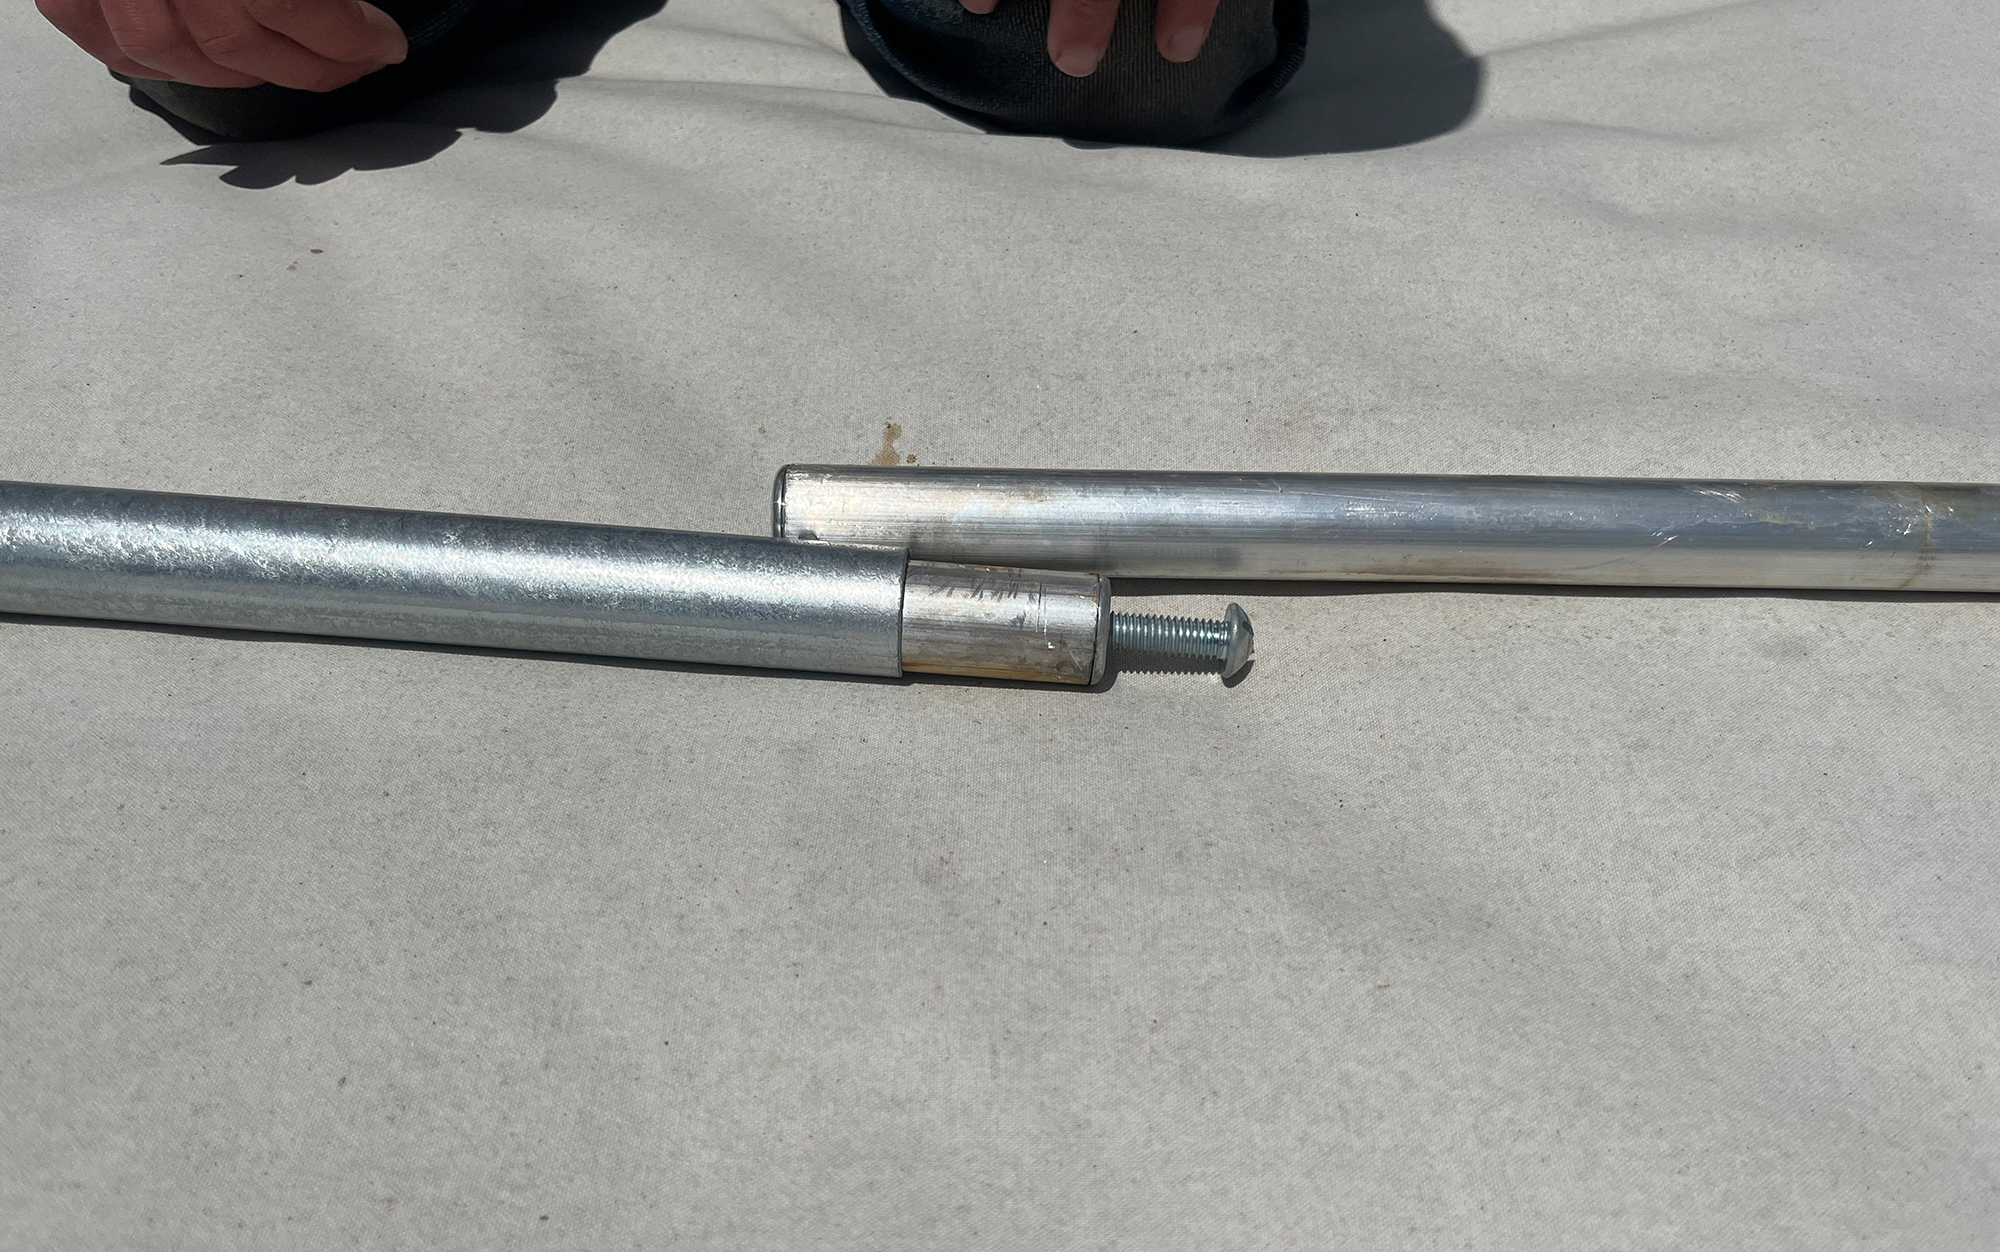 To tension the ridge pole responsible for keeping the roof taut, insert the screw into its mate and push down. Then slide the steel tube overtop to secure the spring bar.